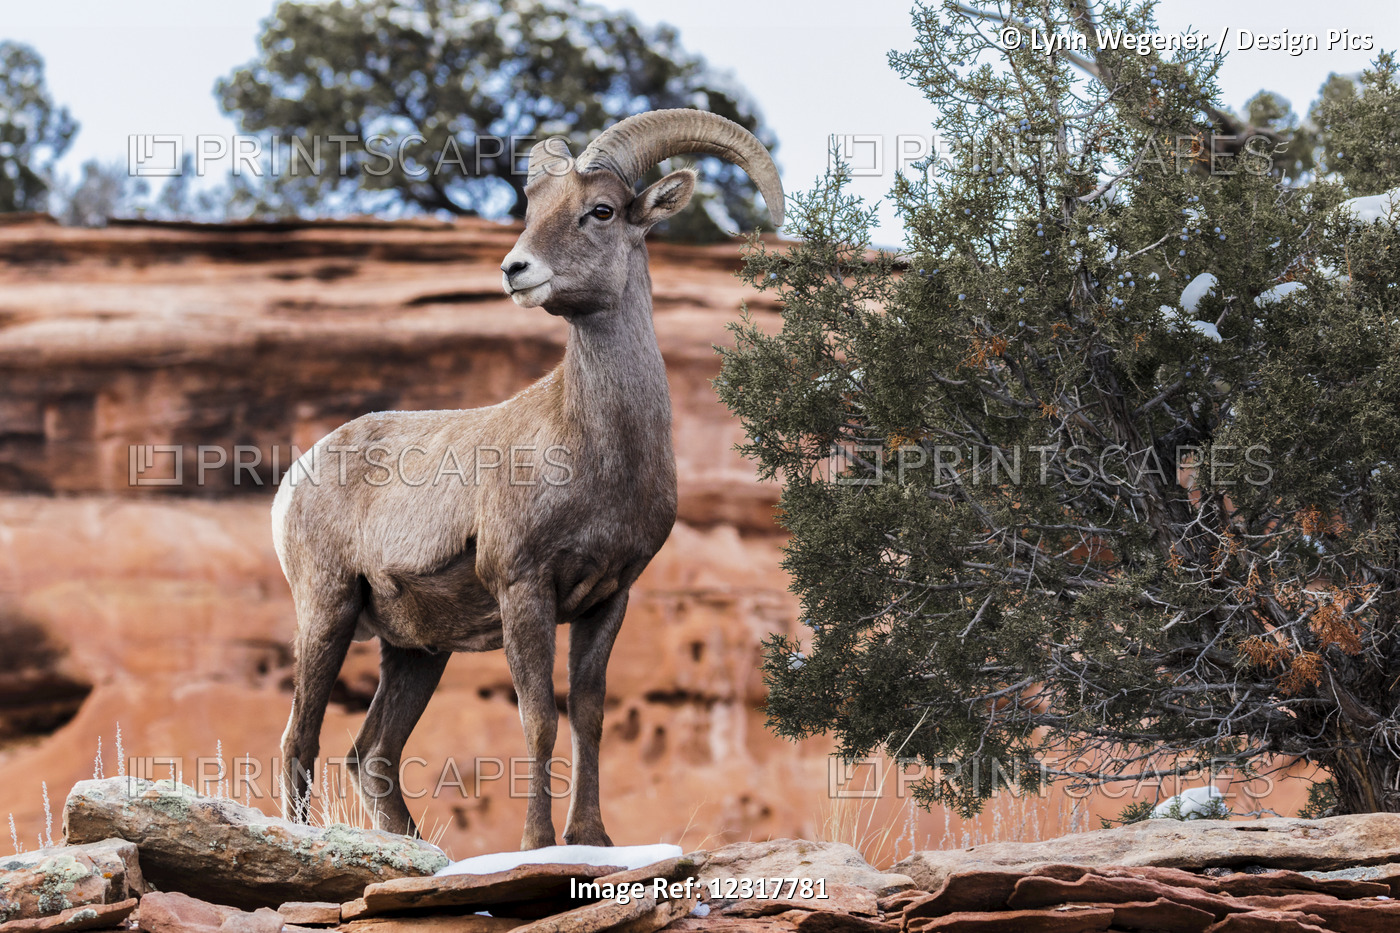 View Of A Desert Bighorn Sheep (Ovis Canadensis Nelsoni)) In The Colorado ...